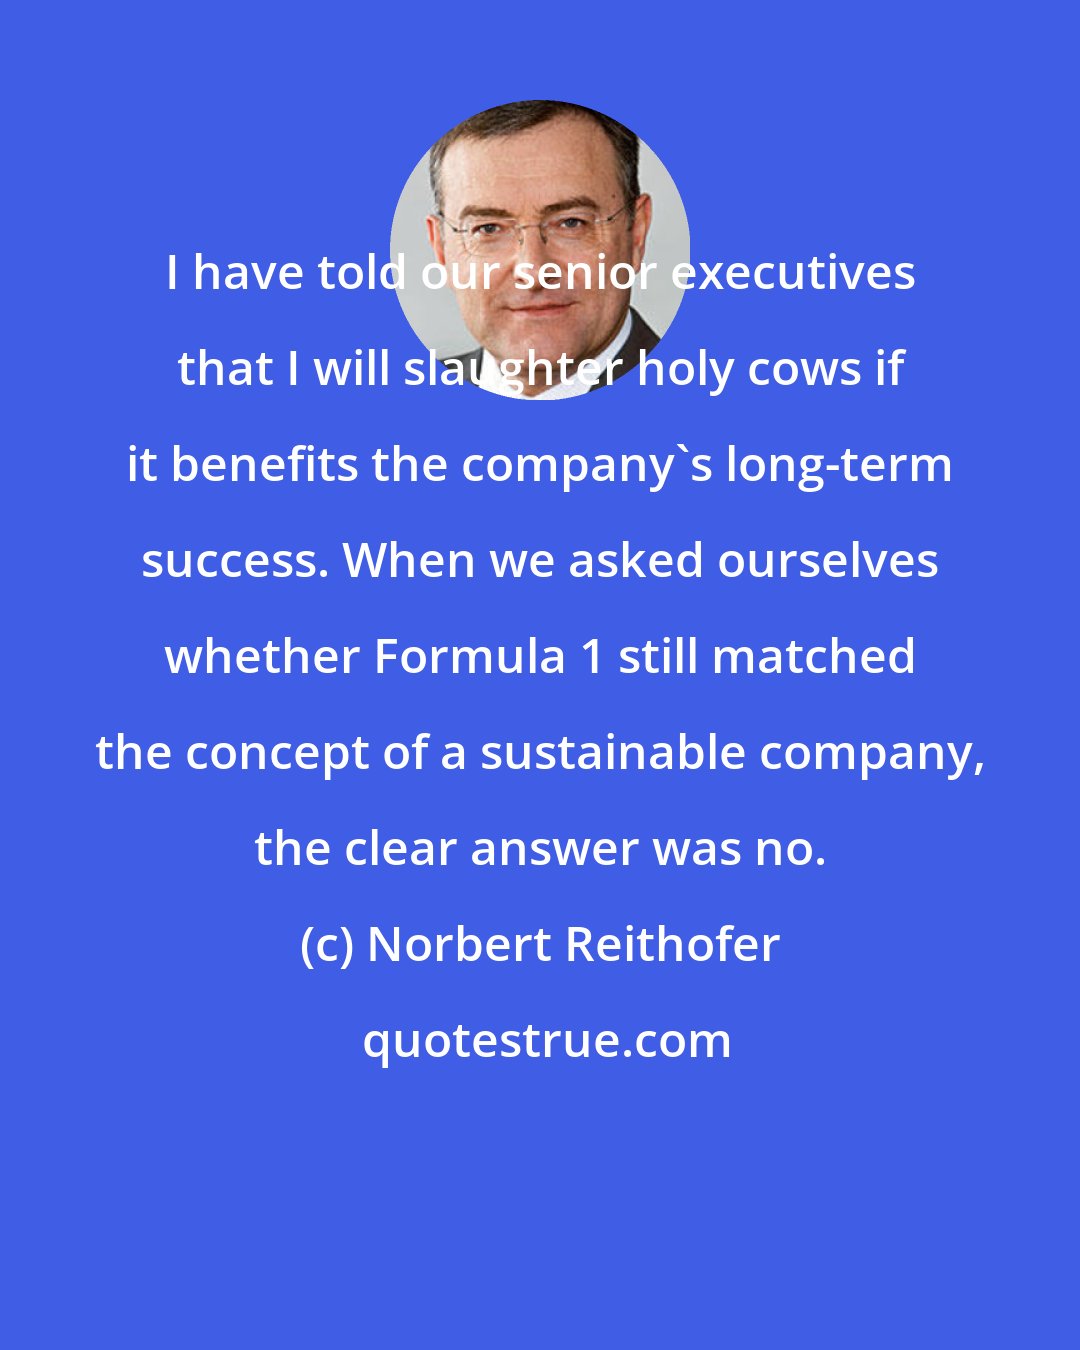 Norbert Reithofer: I have told our senior executives that I will slaughter holy cows if it benefits the company's long-term success. When we asked ourselves whether Formula 1 still matched the concept of a sustainable company, the clear answer was no.